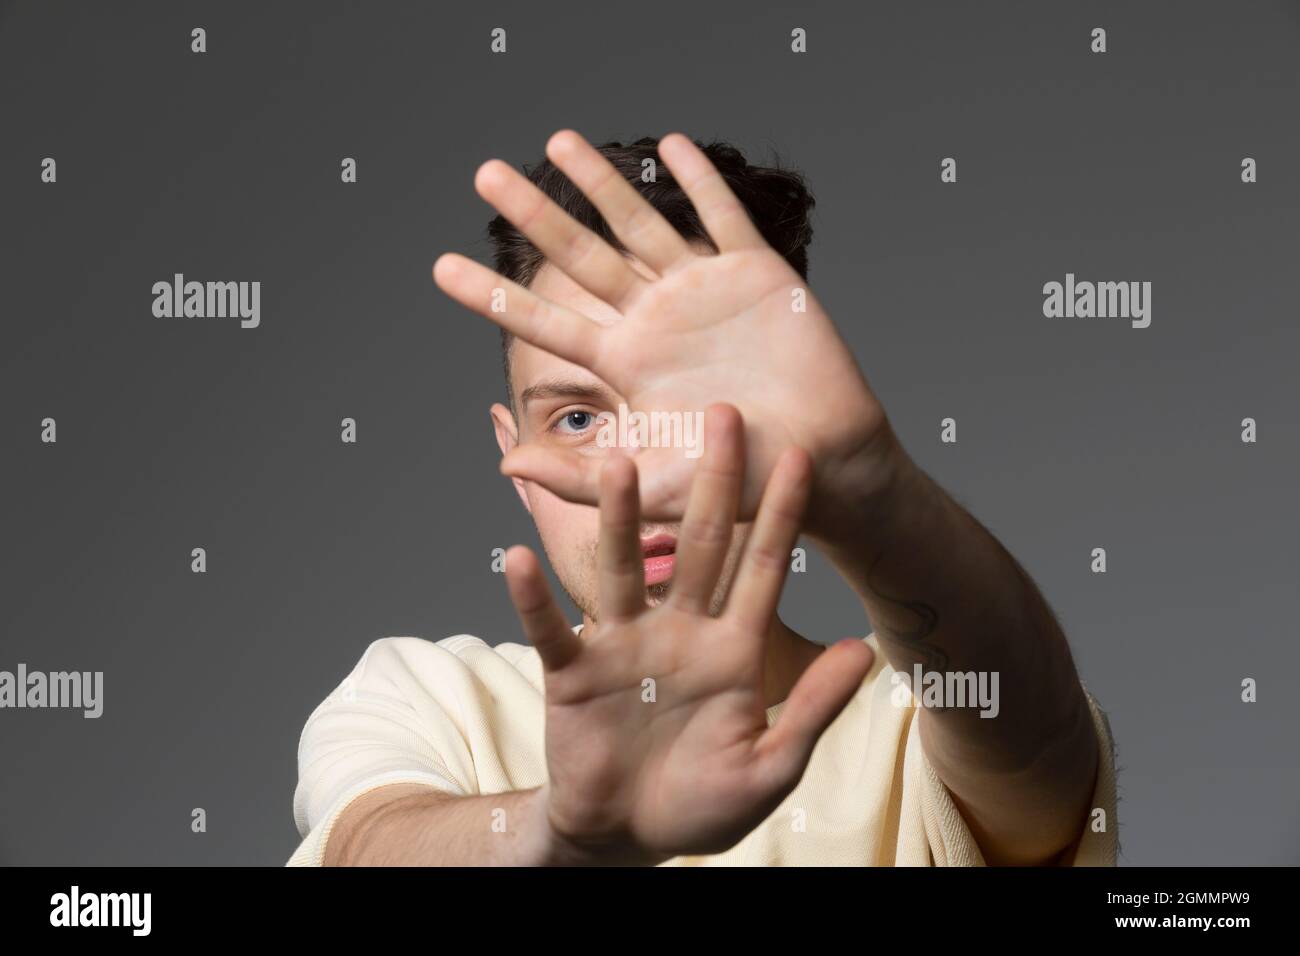 Portrait man covering face with hands Stock Photo